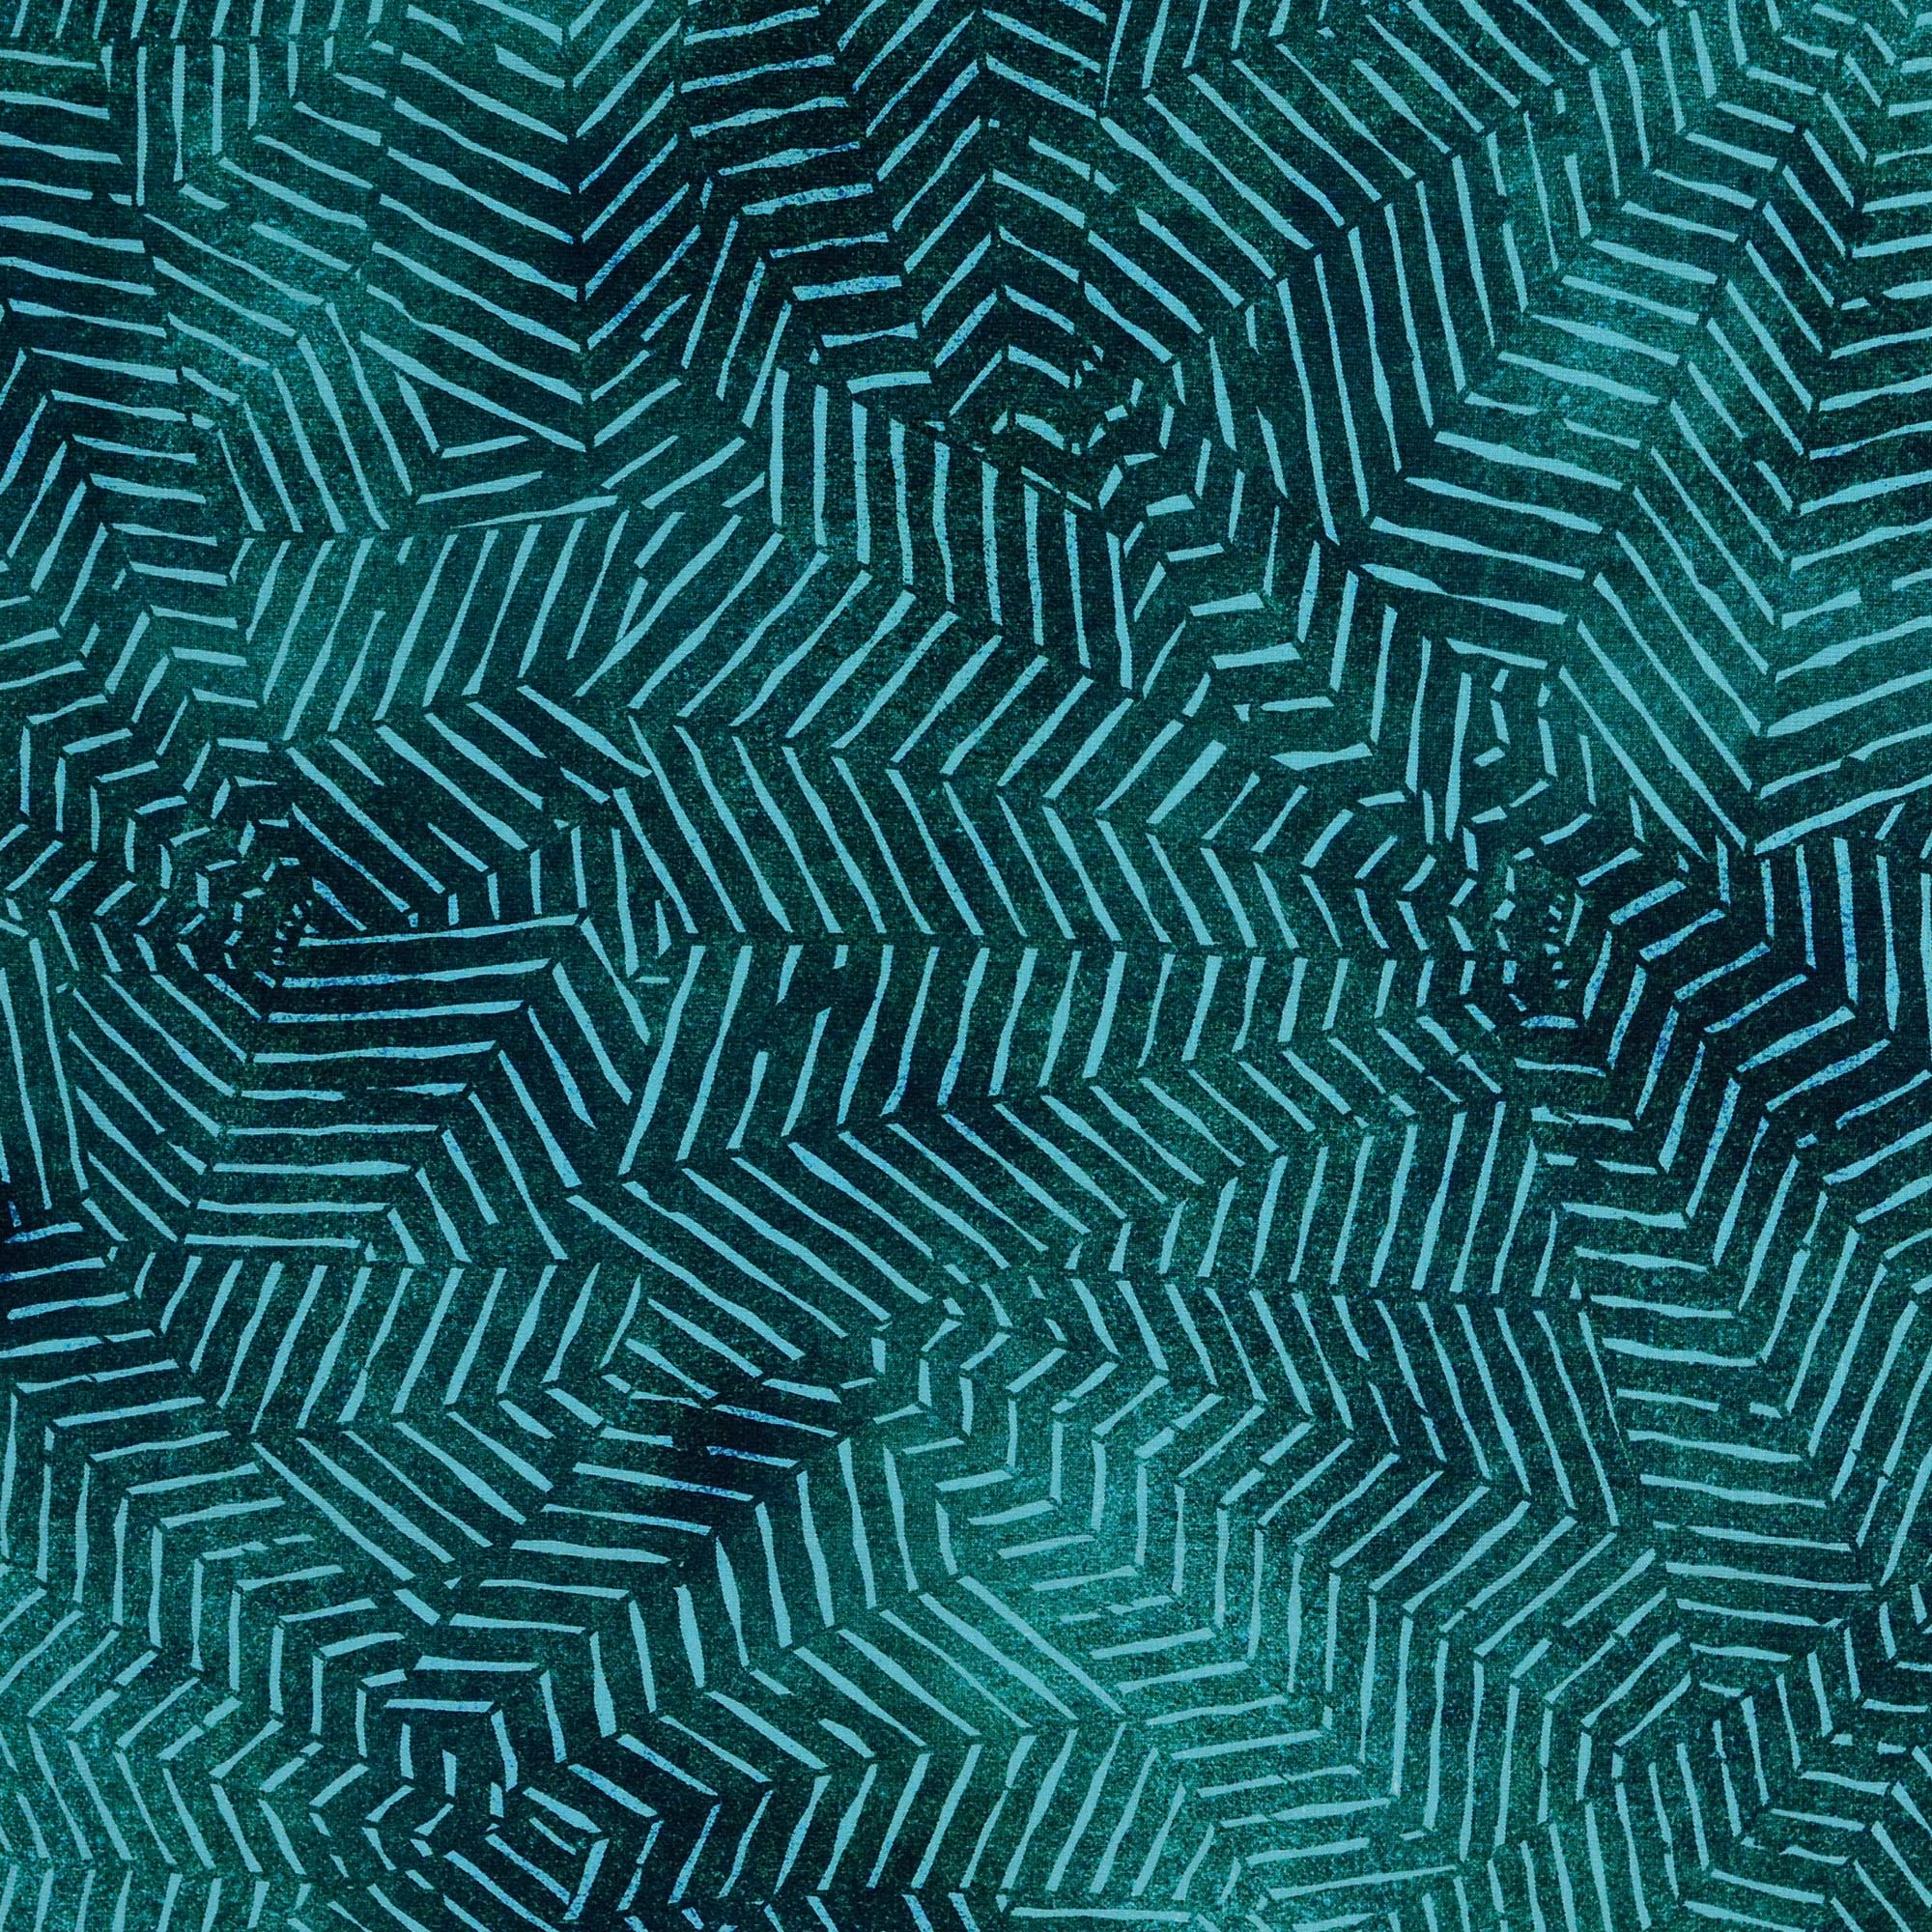 Mystical Night Teal Cotton Jersey Fabric